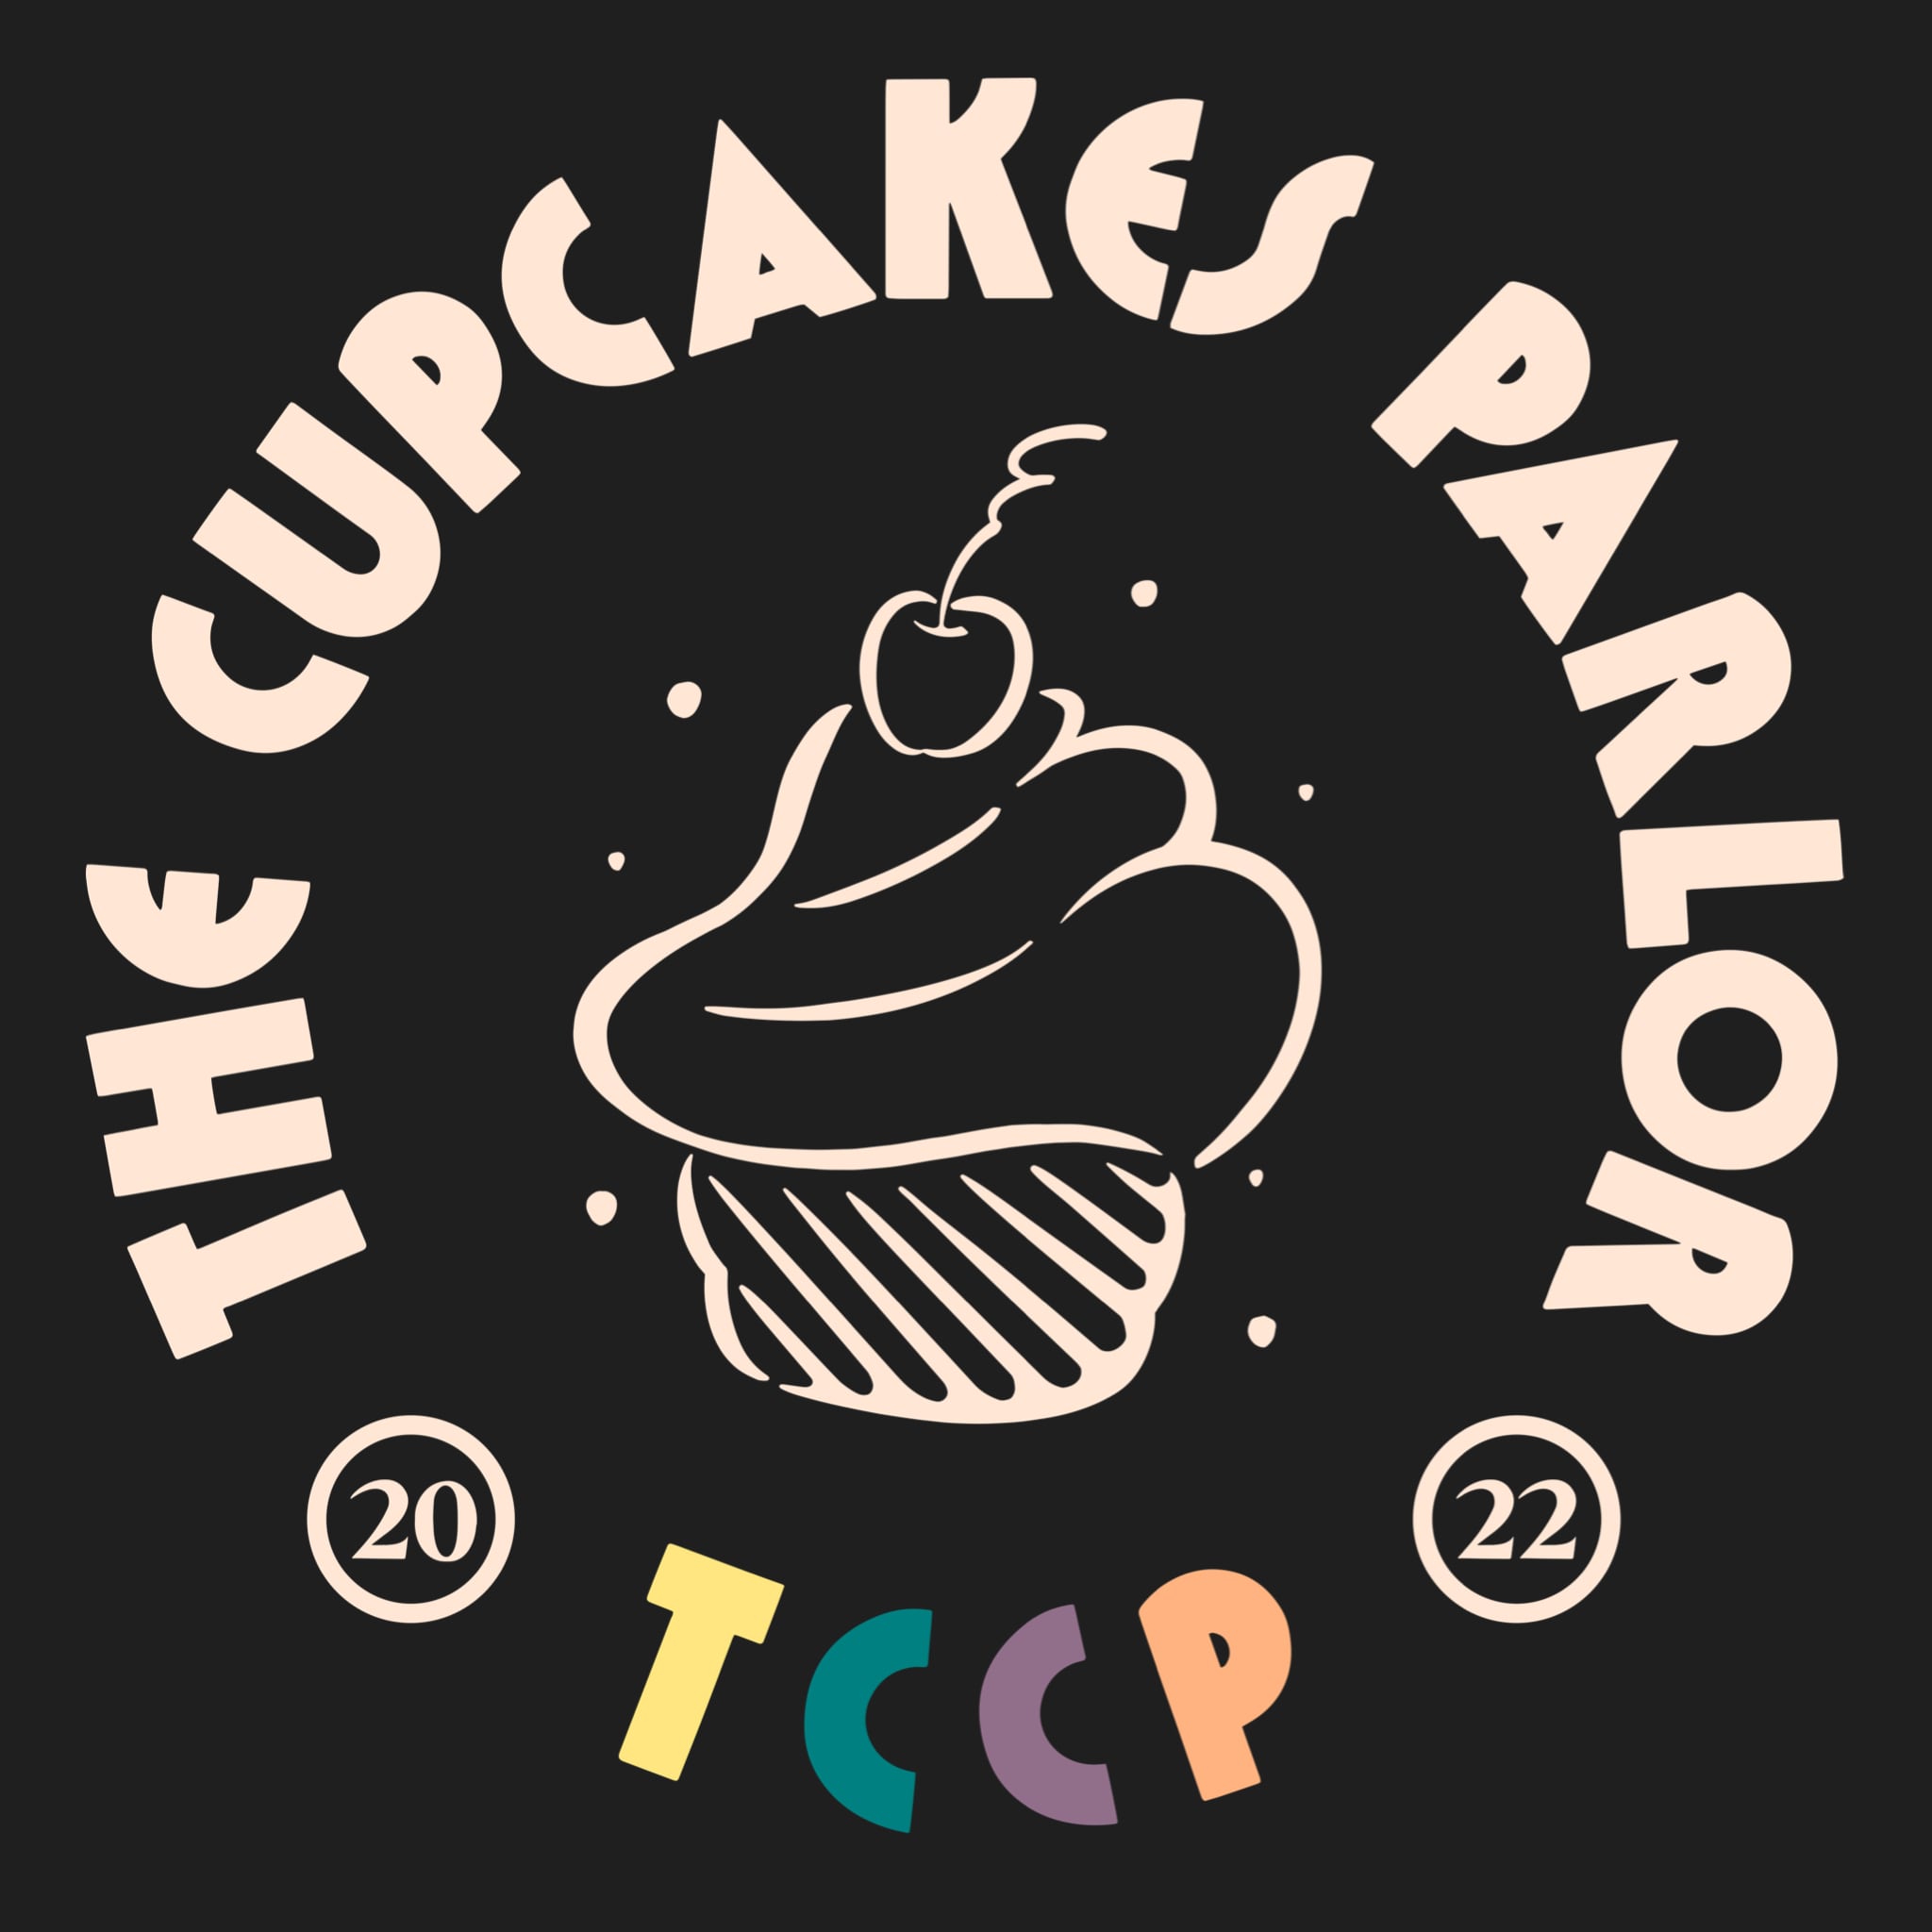 THE CUPCAKES PARLOR